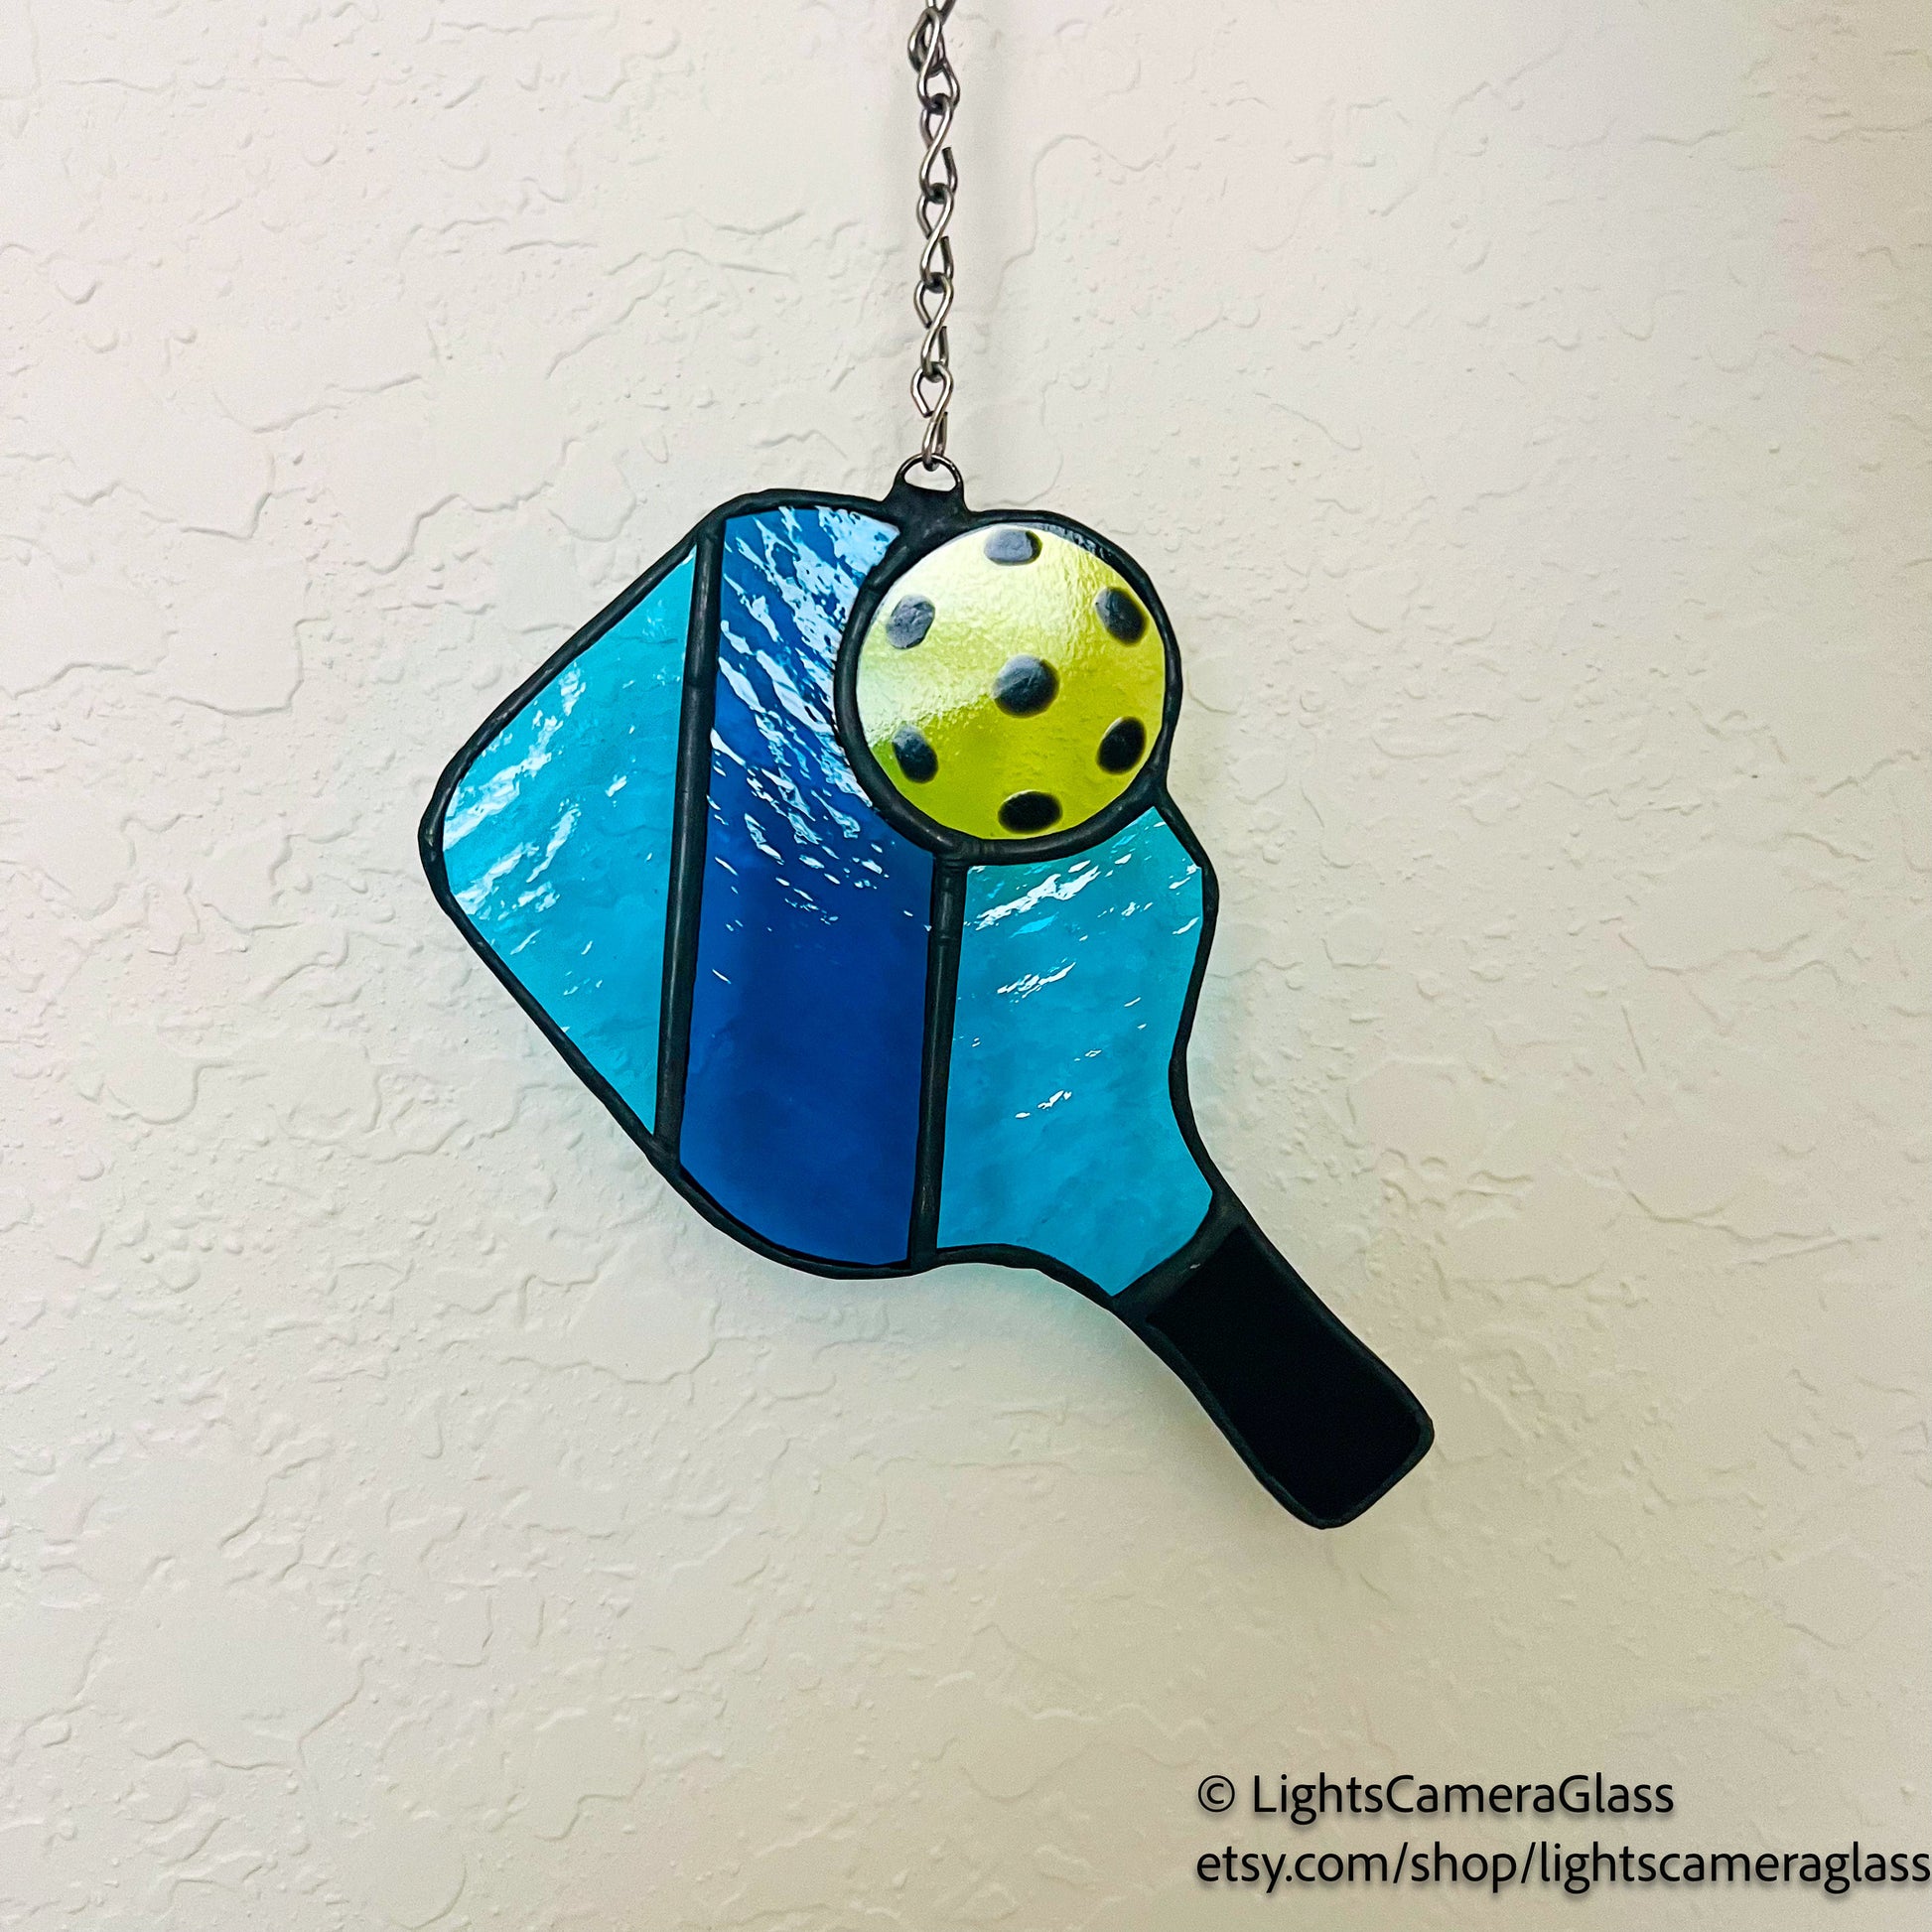 Stained Glass Pickleball Suncatcher-Stained Glass Pickleball Window Hanging-Pickleball Car Charm-Pickleball Ornament-Gift for Her-Pickleball